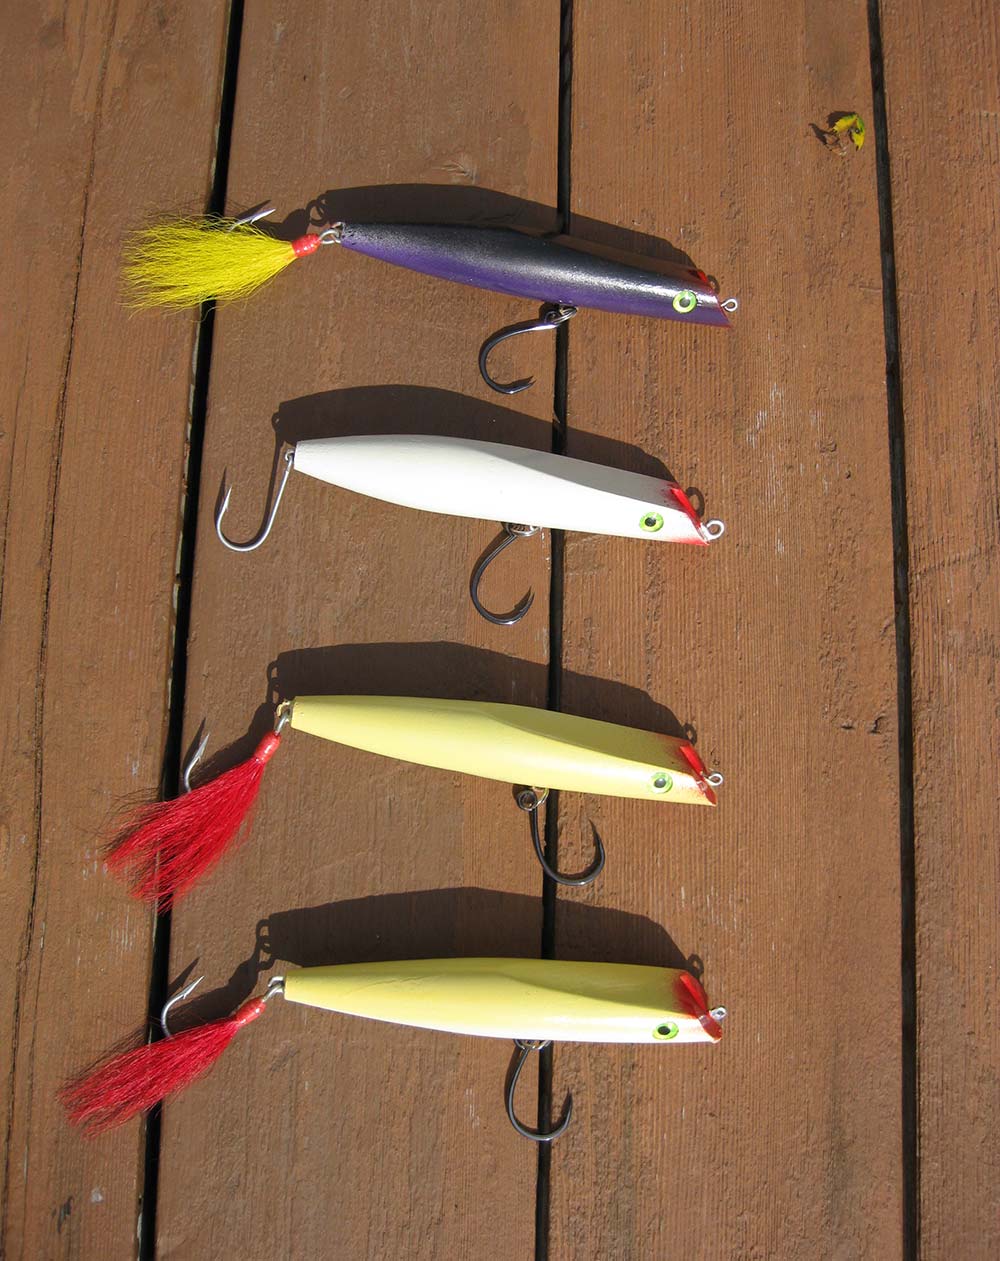 How To Make Fishing Lures: Homemade Lures On Test Again